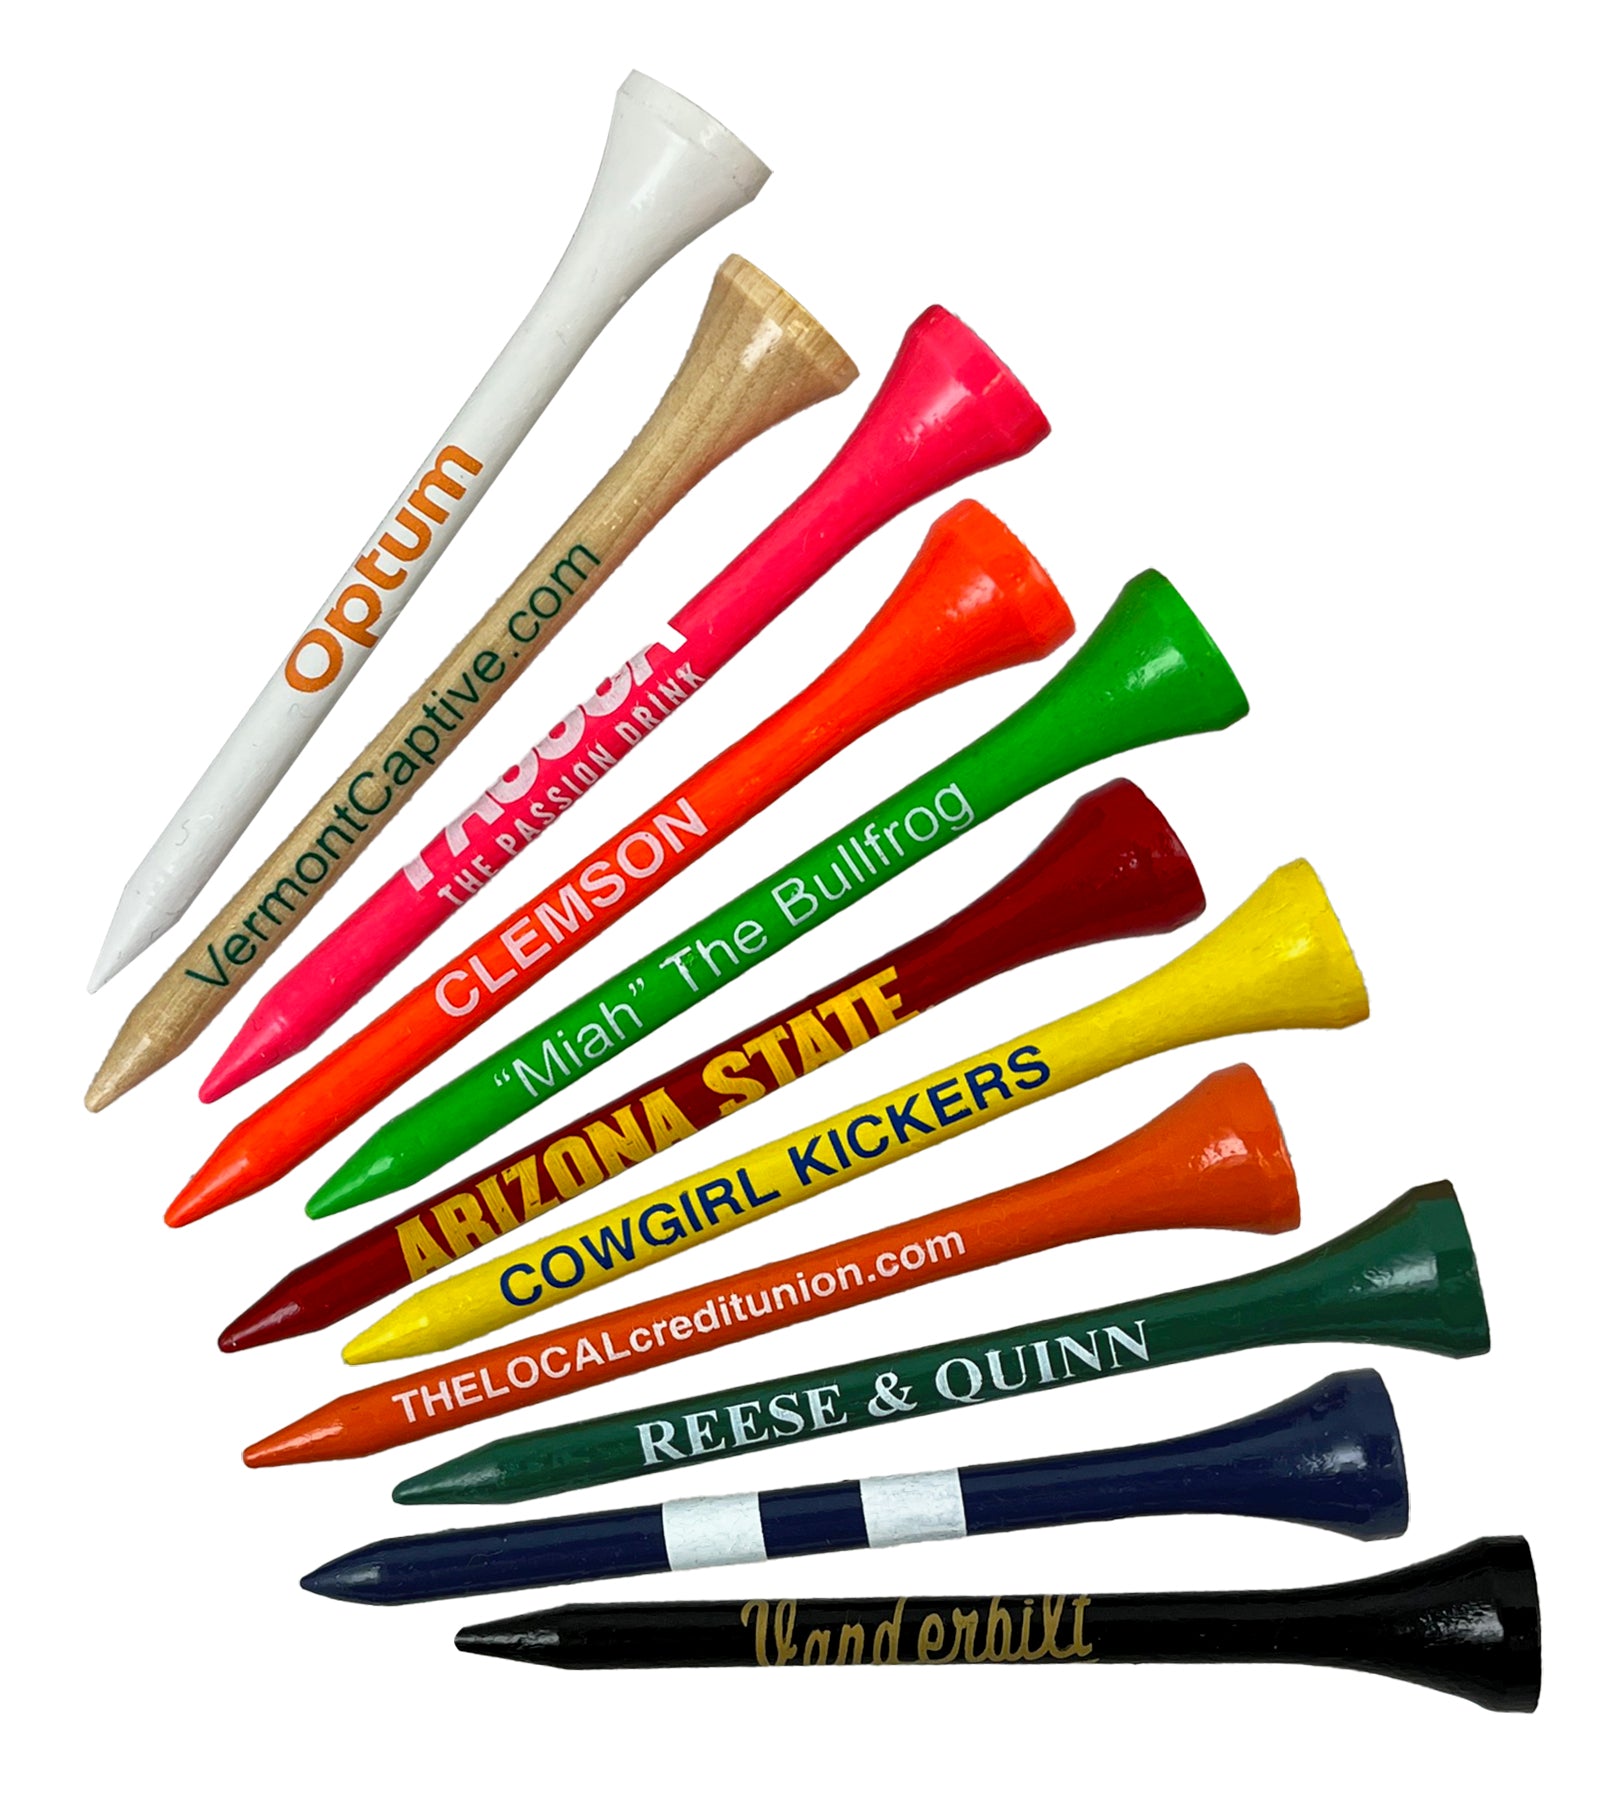 All Personalized Golf Tees